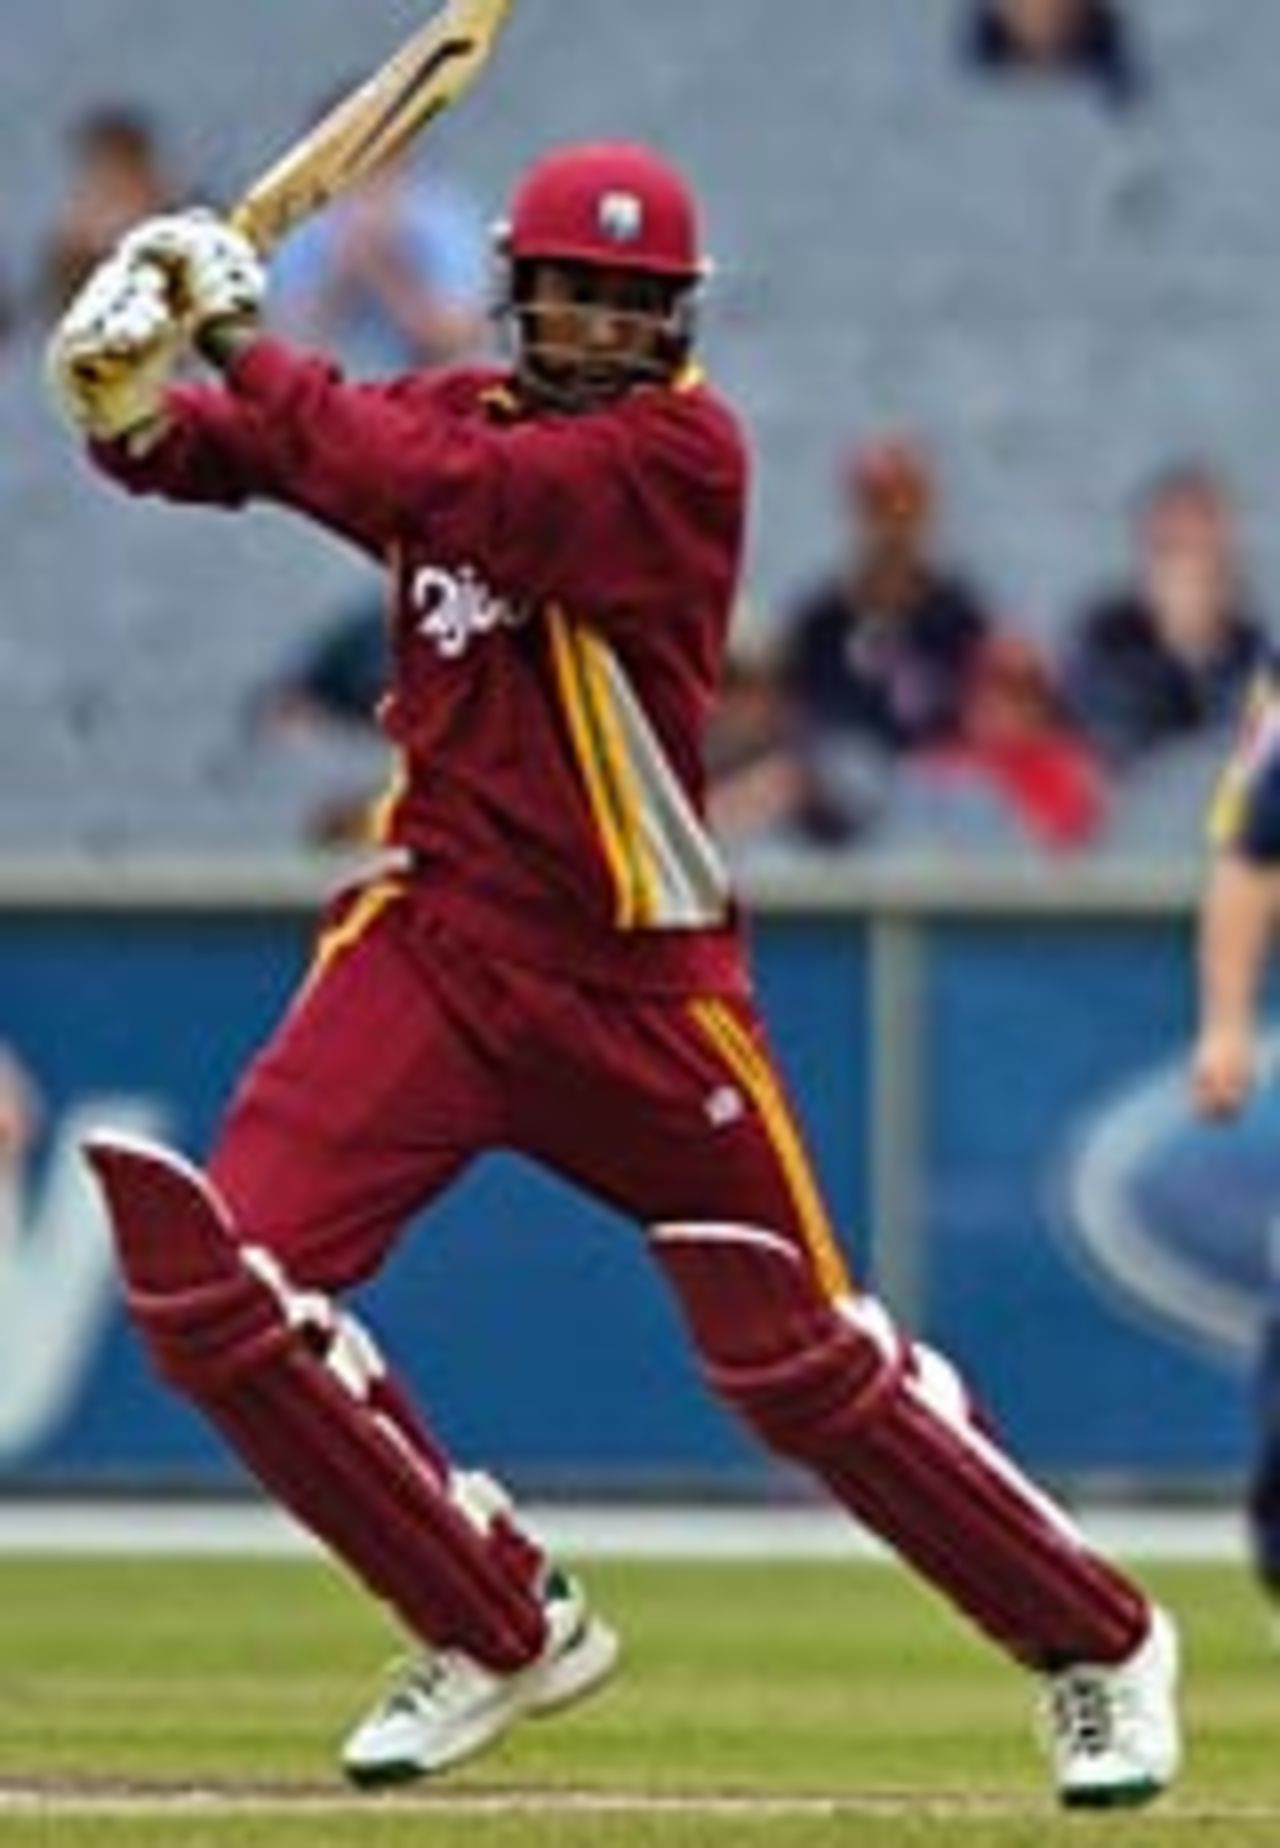 Wavell Hinds on his way to 22, Victoria v West Indians, MCG, January 5, 2005